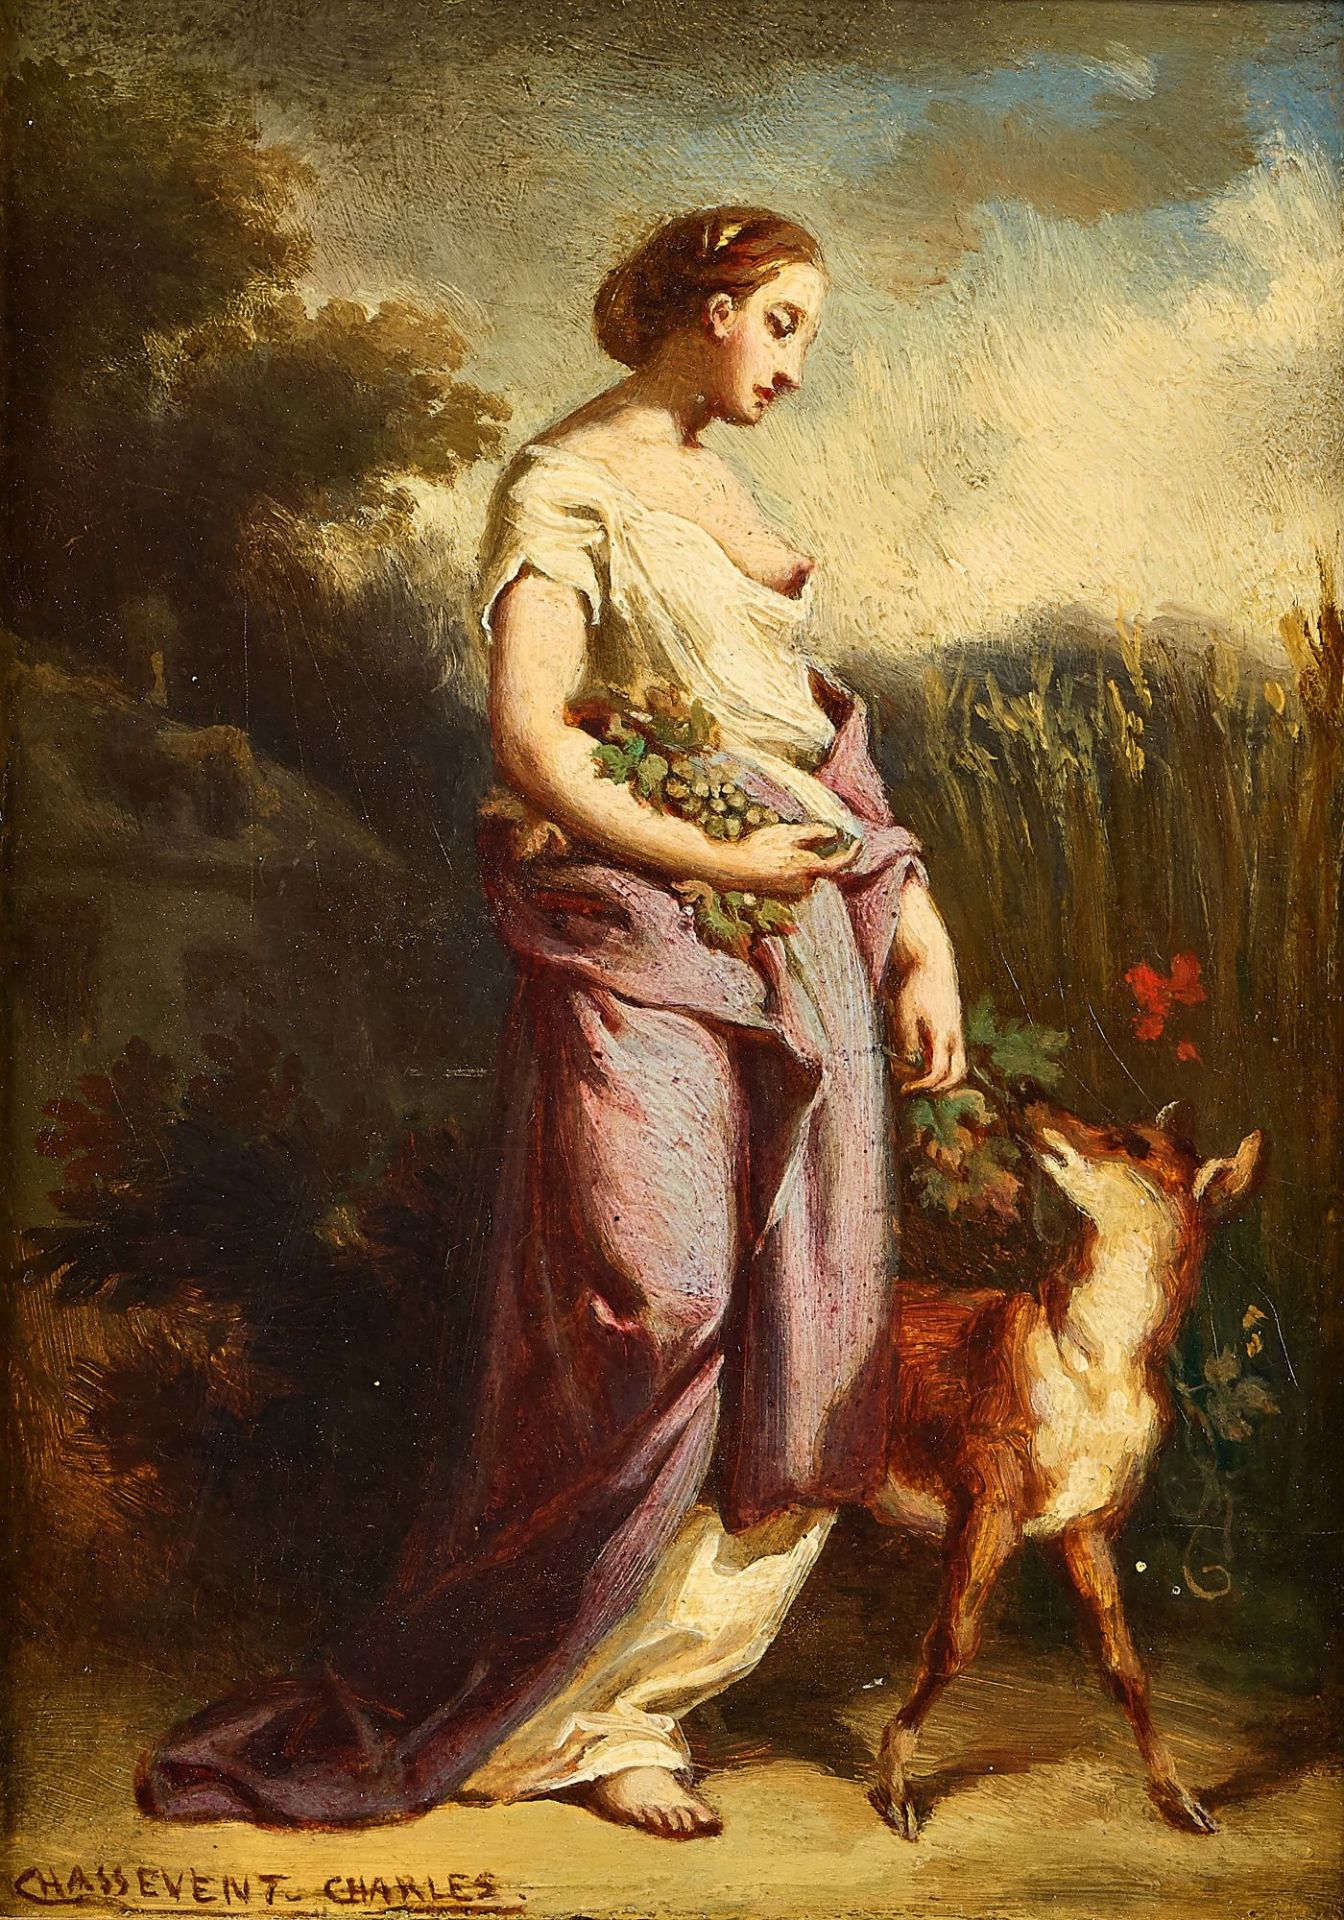 CHASSEVENT, CHARLES LOUIS: Ceres.